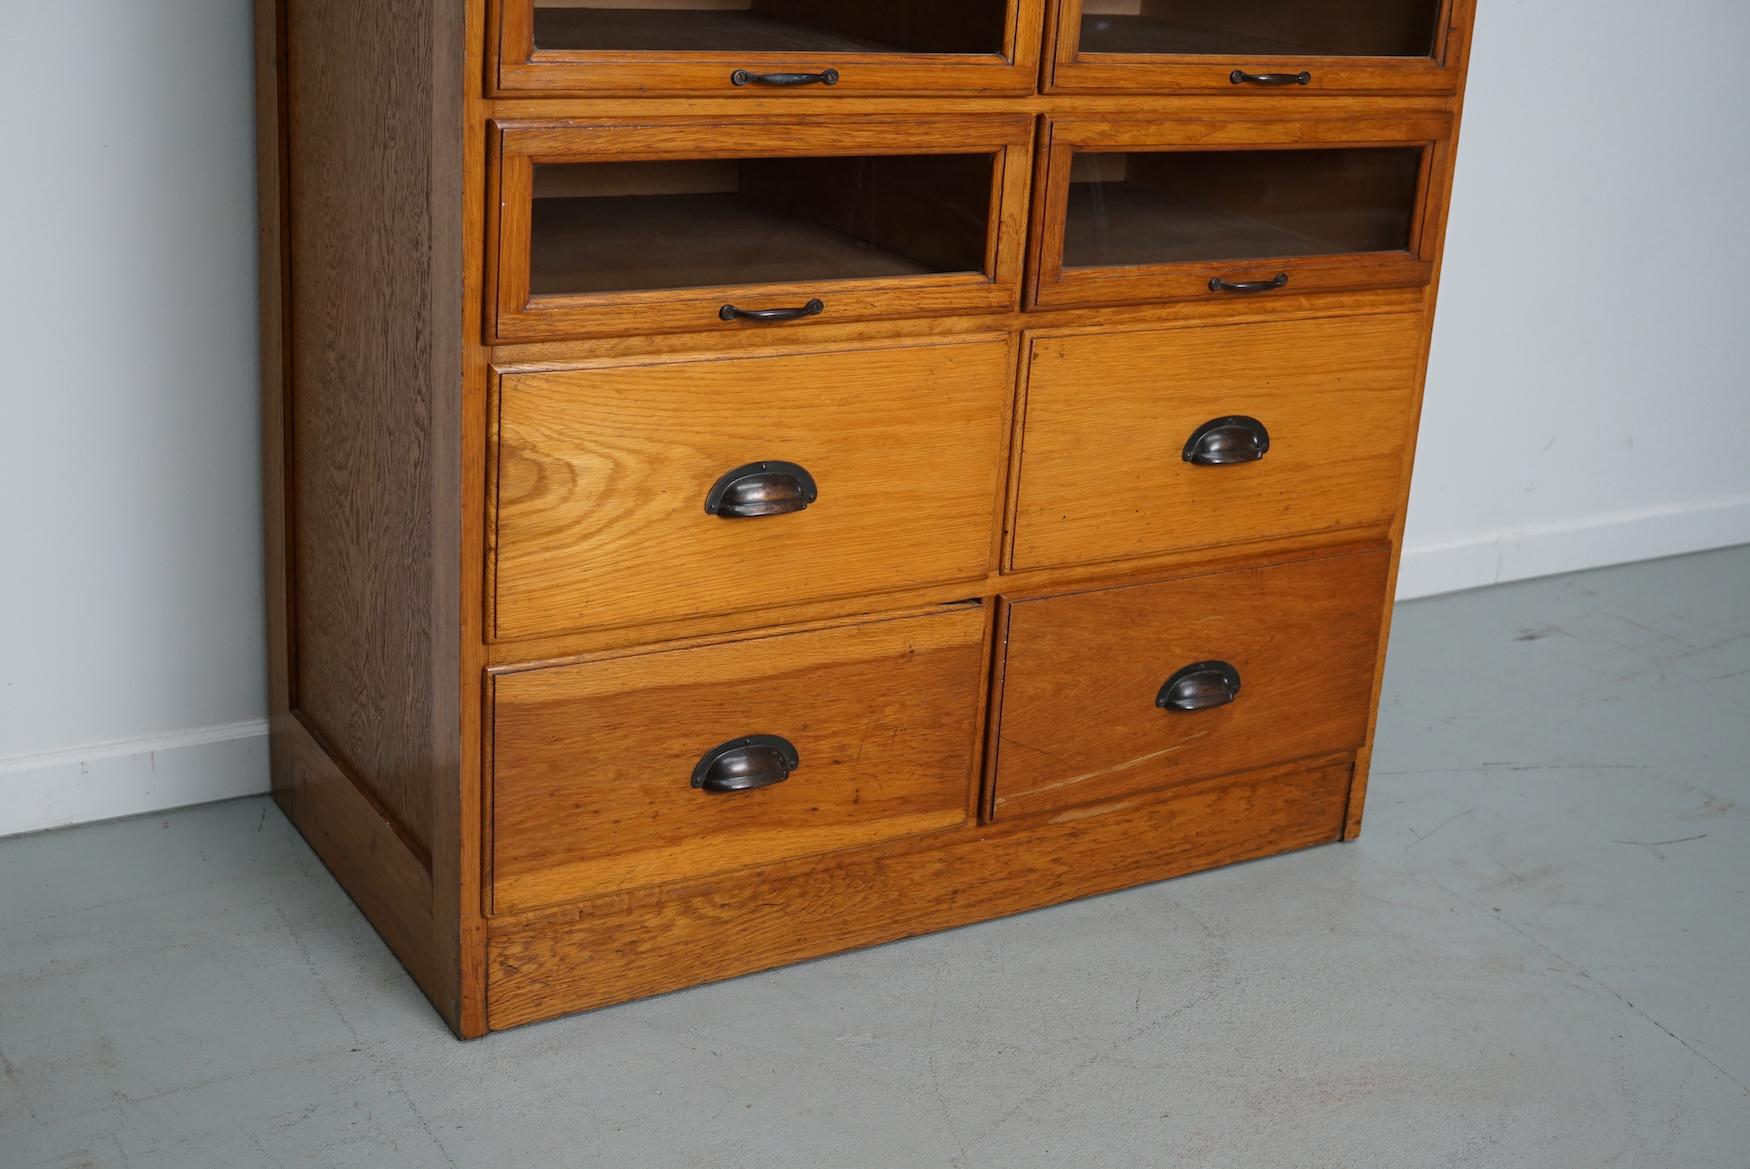 English Haberdashery Shop Cabinet with Glass Fronted Drawers, Circa 1930s 3